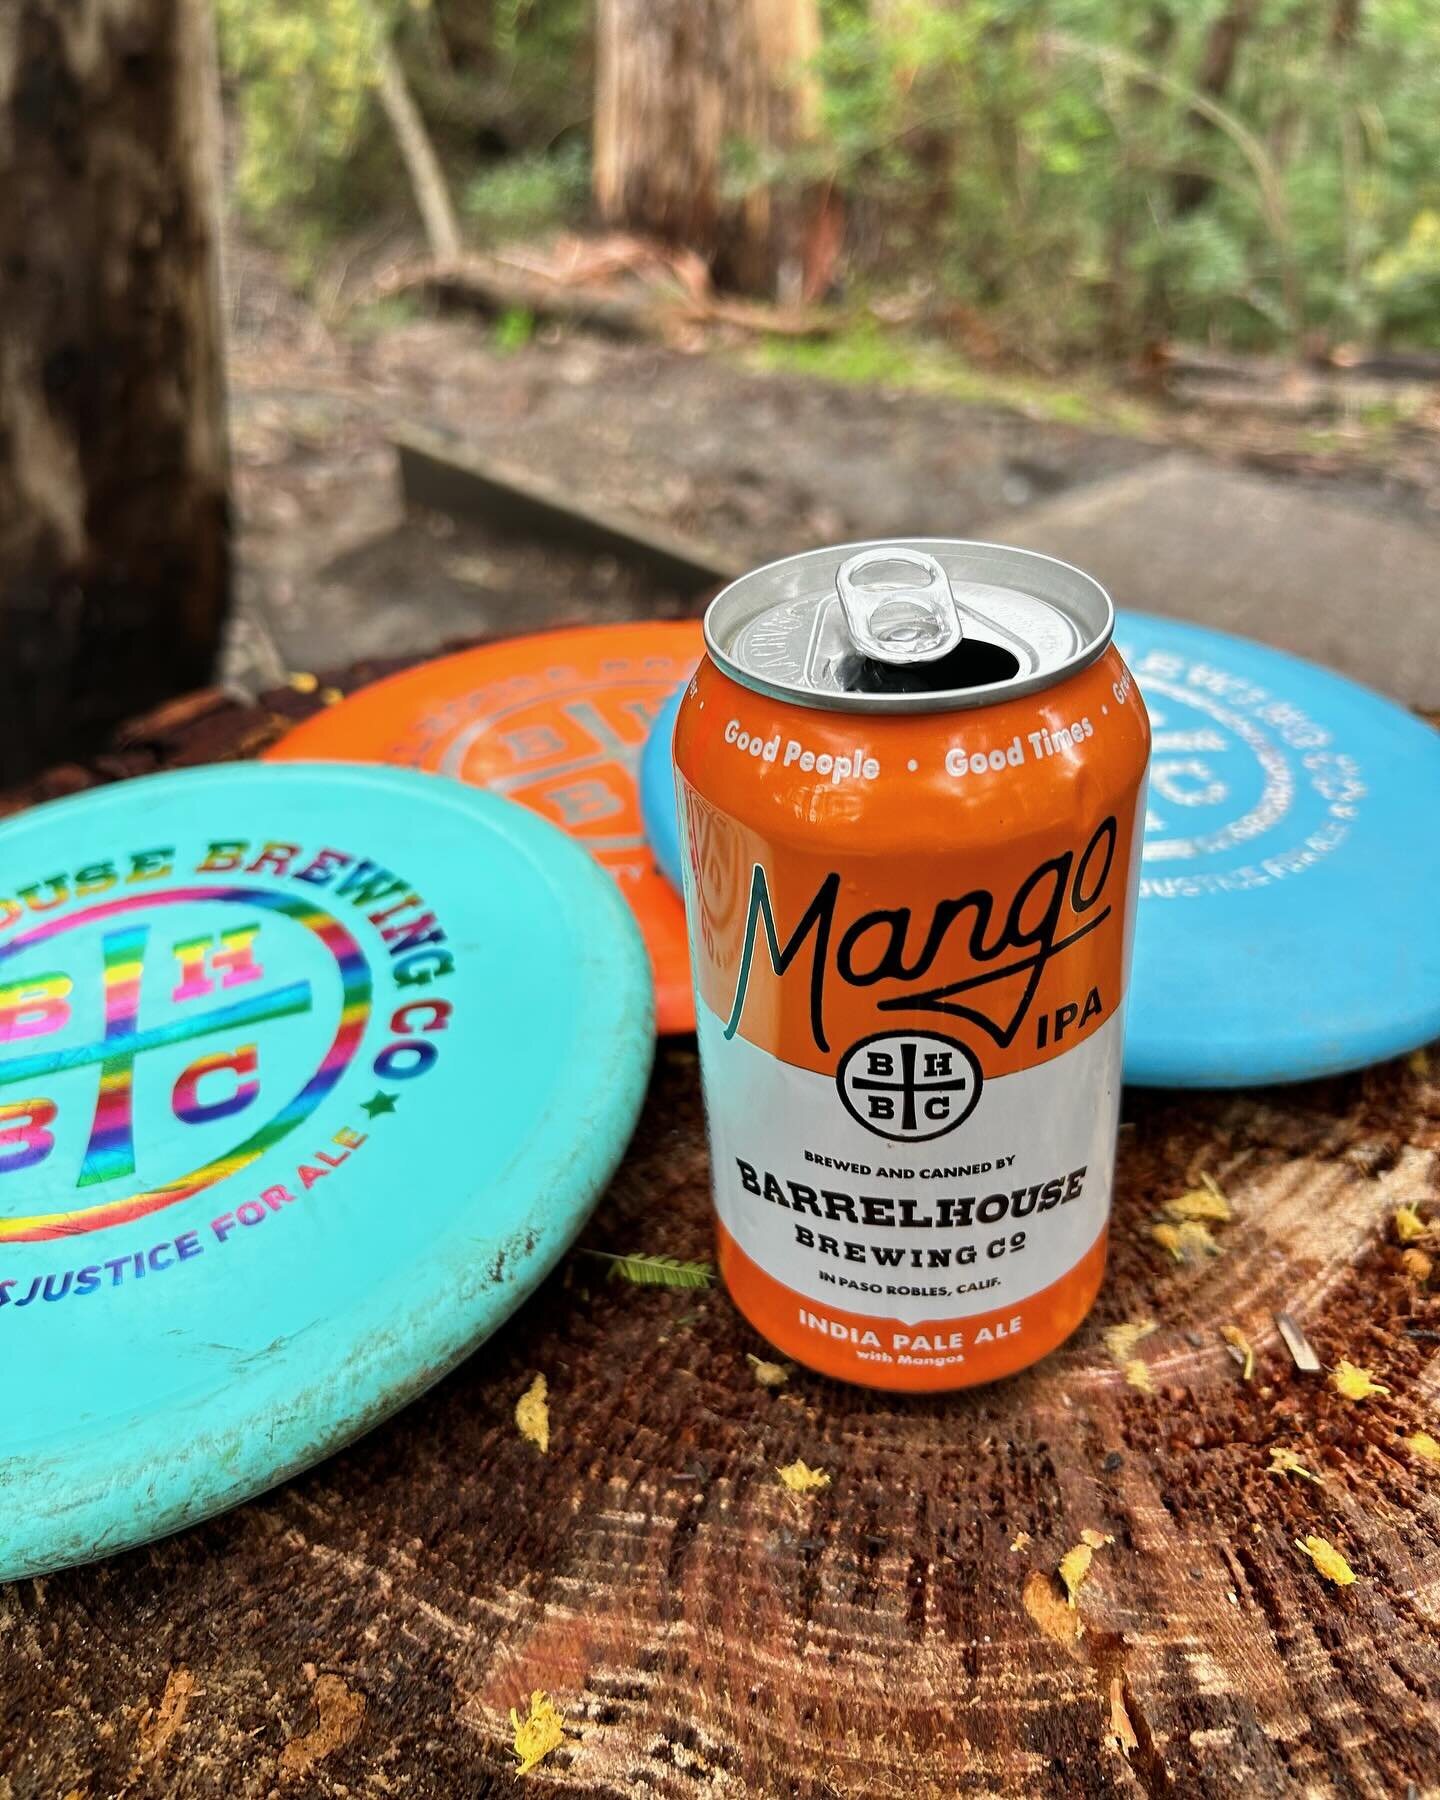 This weekend we'll be spending our time outside drinking our favorite bhbc beer and downstairs at bhbc slo listening to live music!🍻

We've got frisbees and discs available at all bhbc locations! 🌳

@jacobster125 LIVE TONIGHT AT 9pm!!🎶